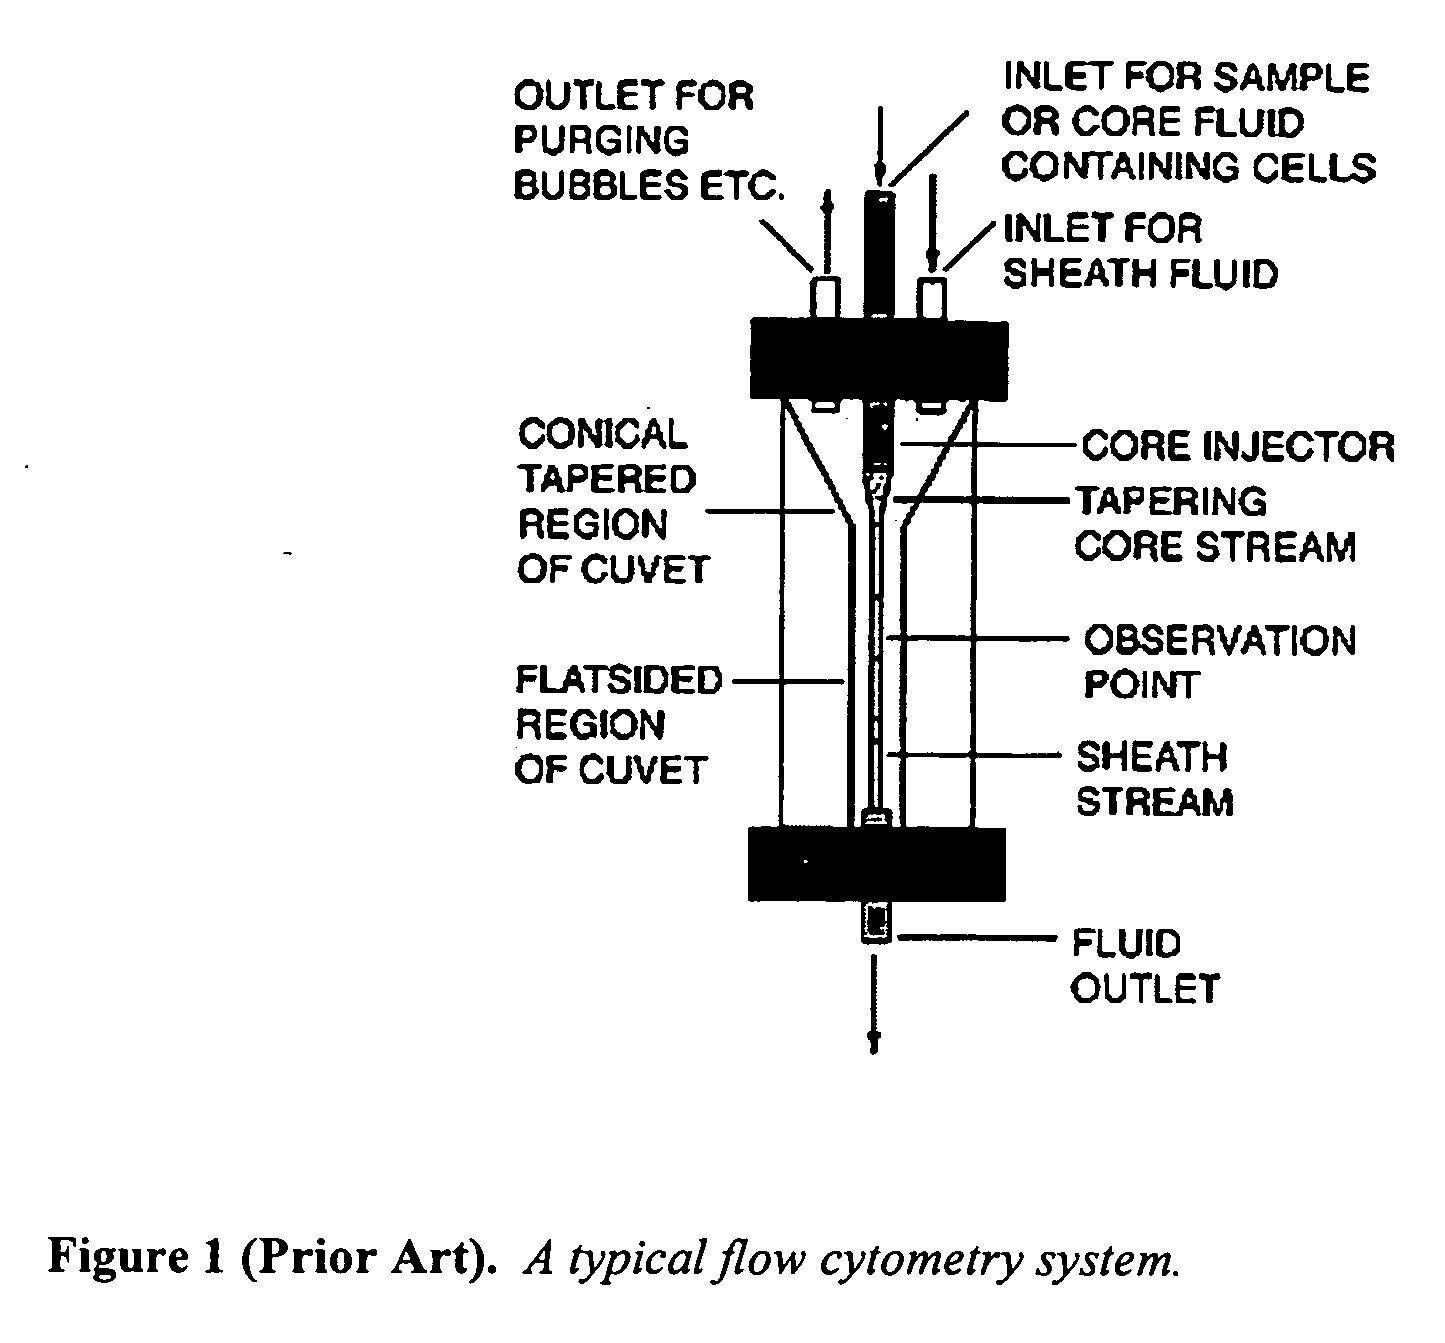 Method and system for counting particles in a laminar flow with an imaging device